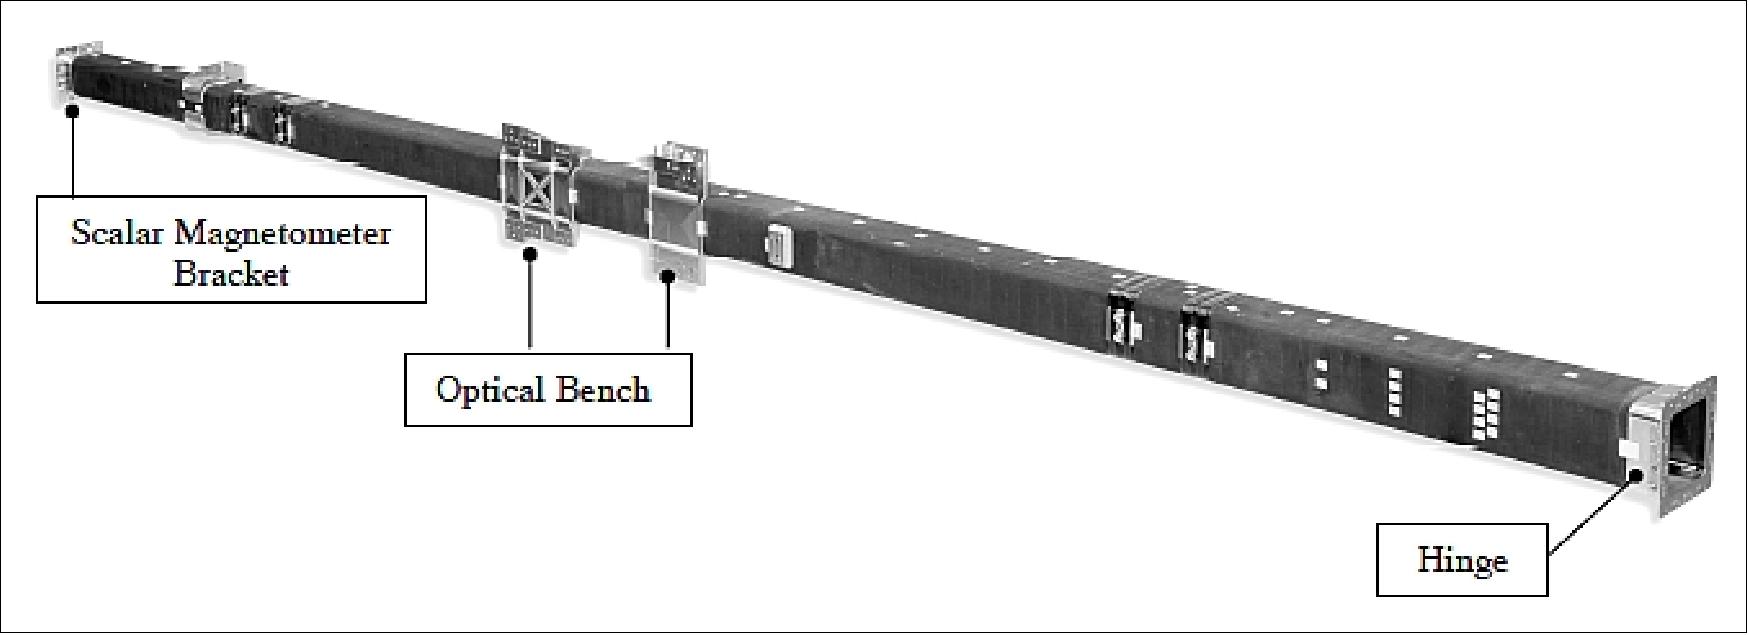 Figure 8: The Swarm optical bench, carbon-fiber tube assembly (image credit: RUAG)